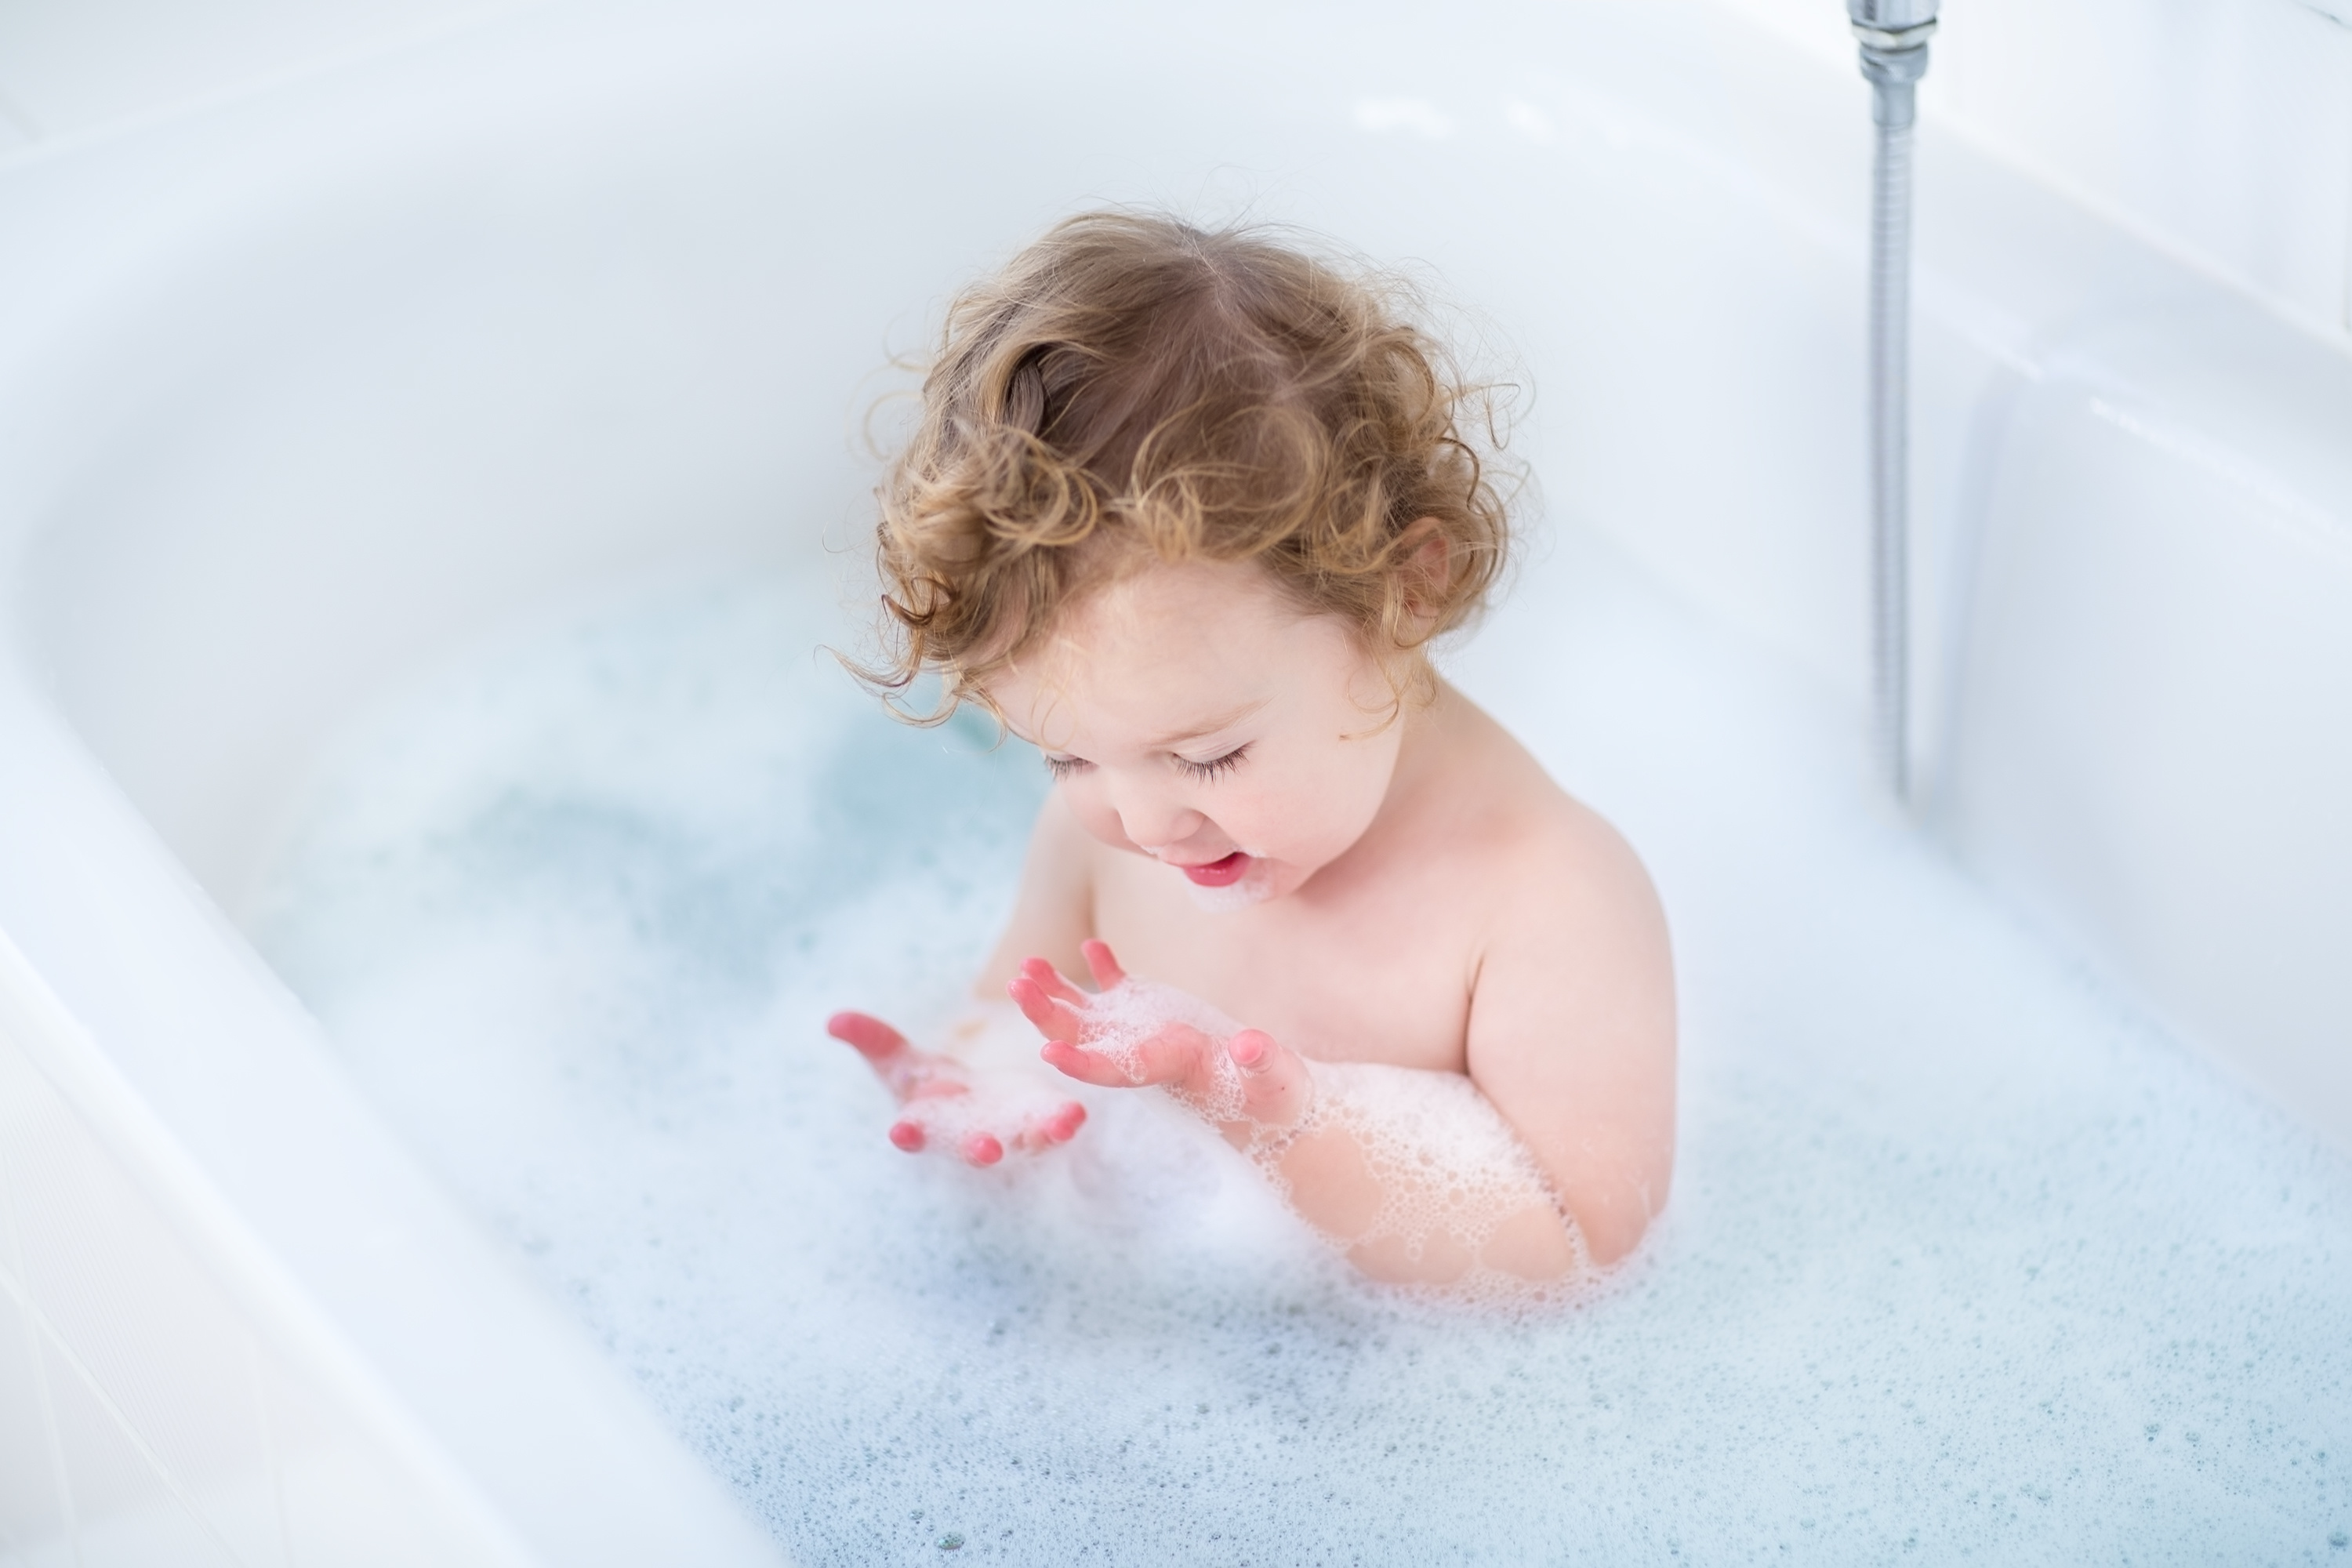 Article image for Soap may be causing food allergies in babies